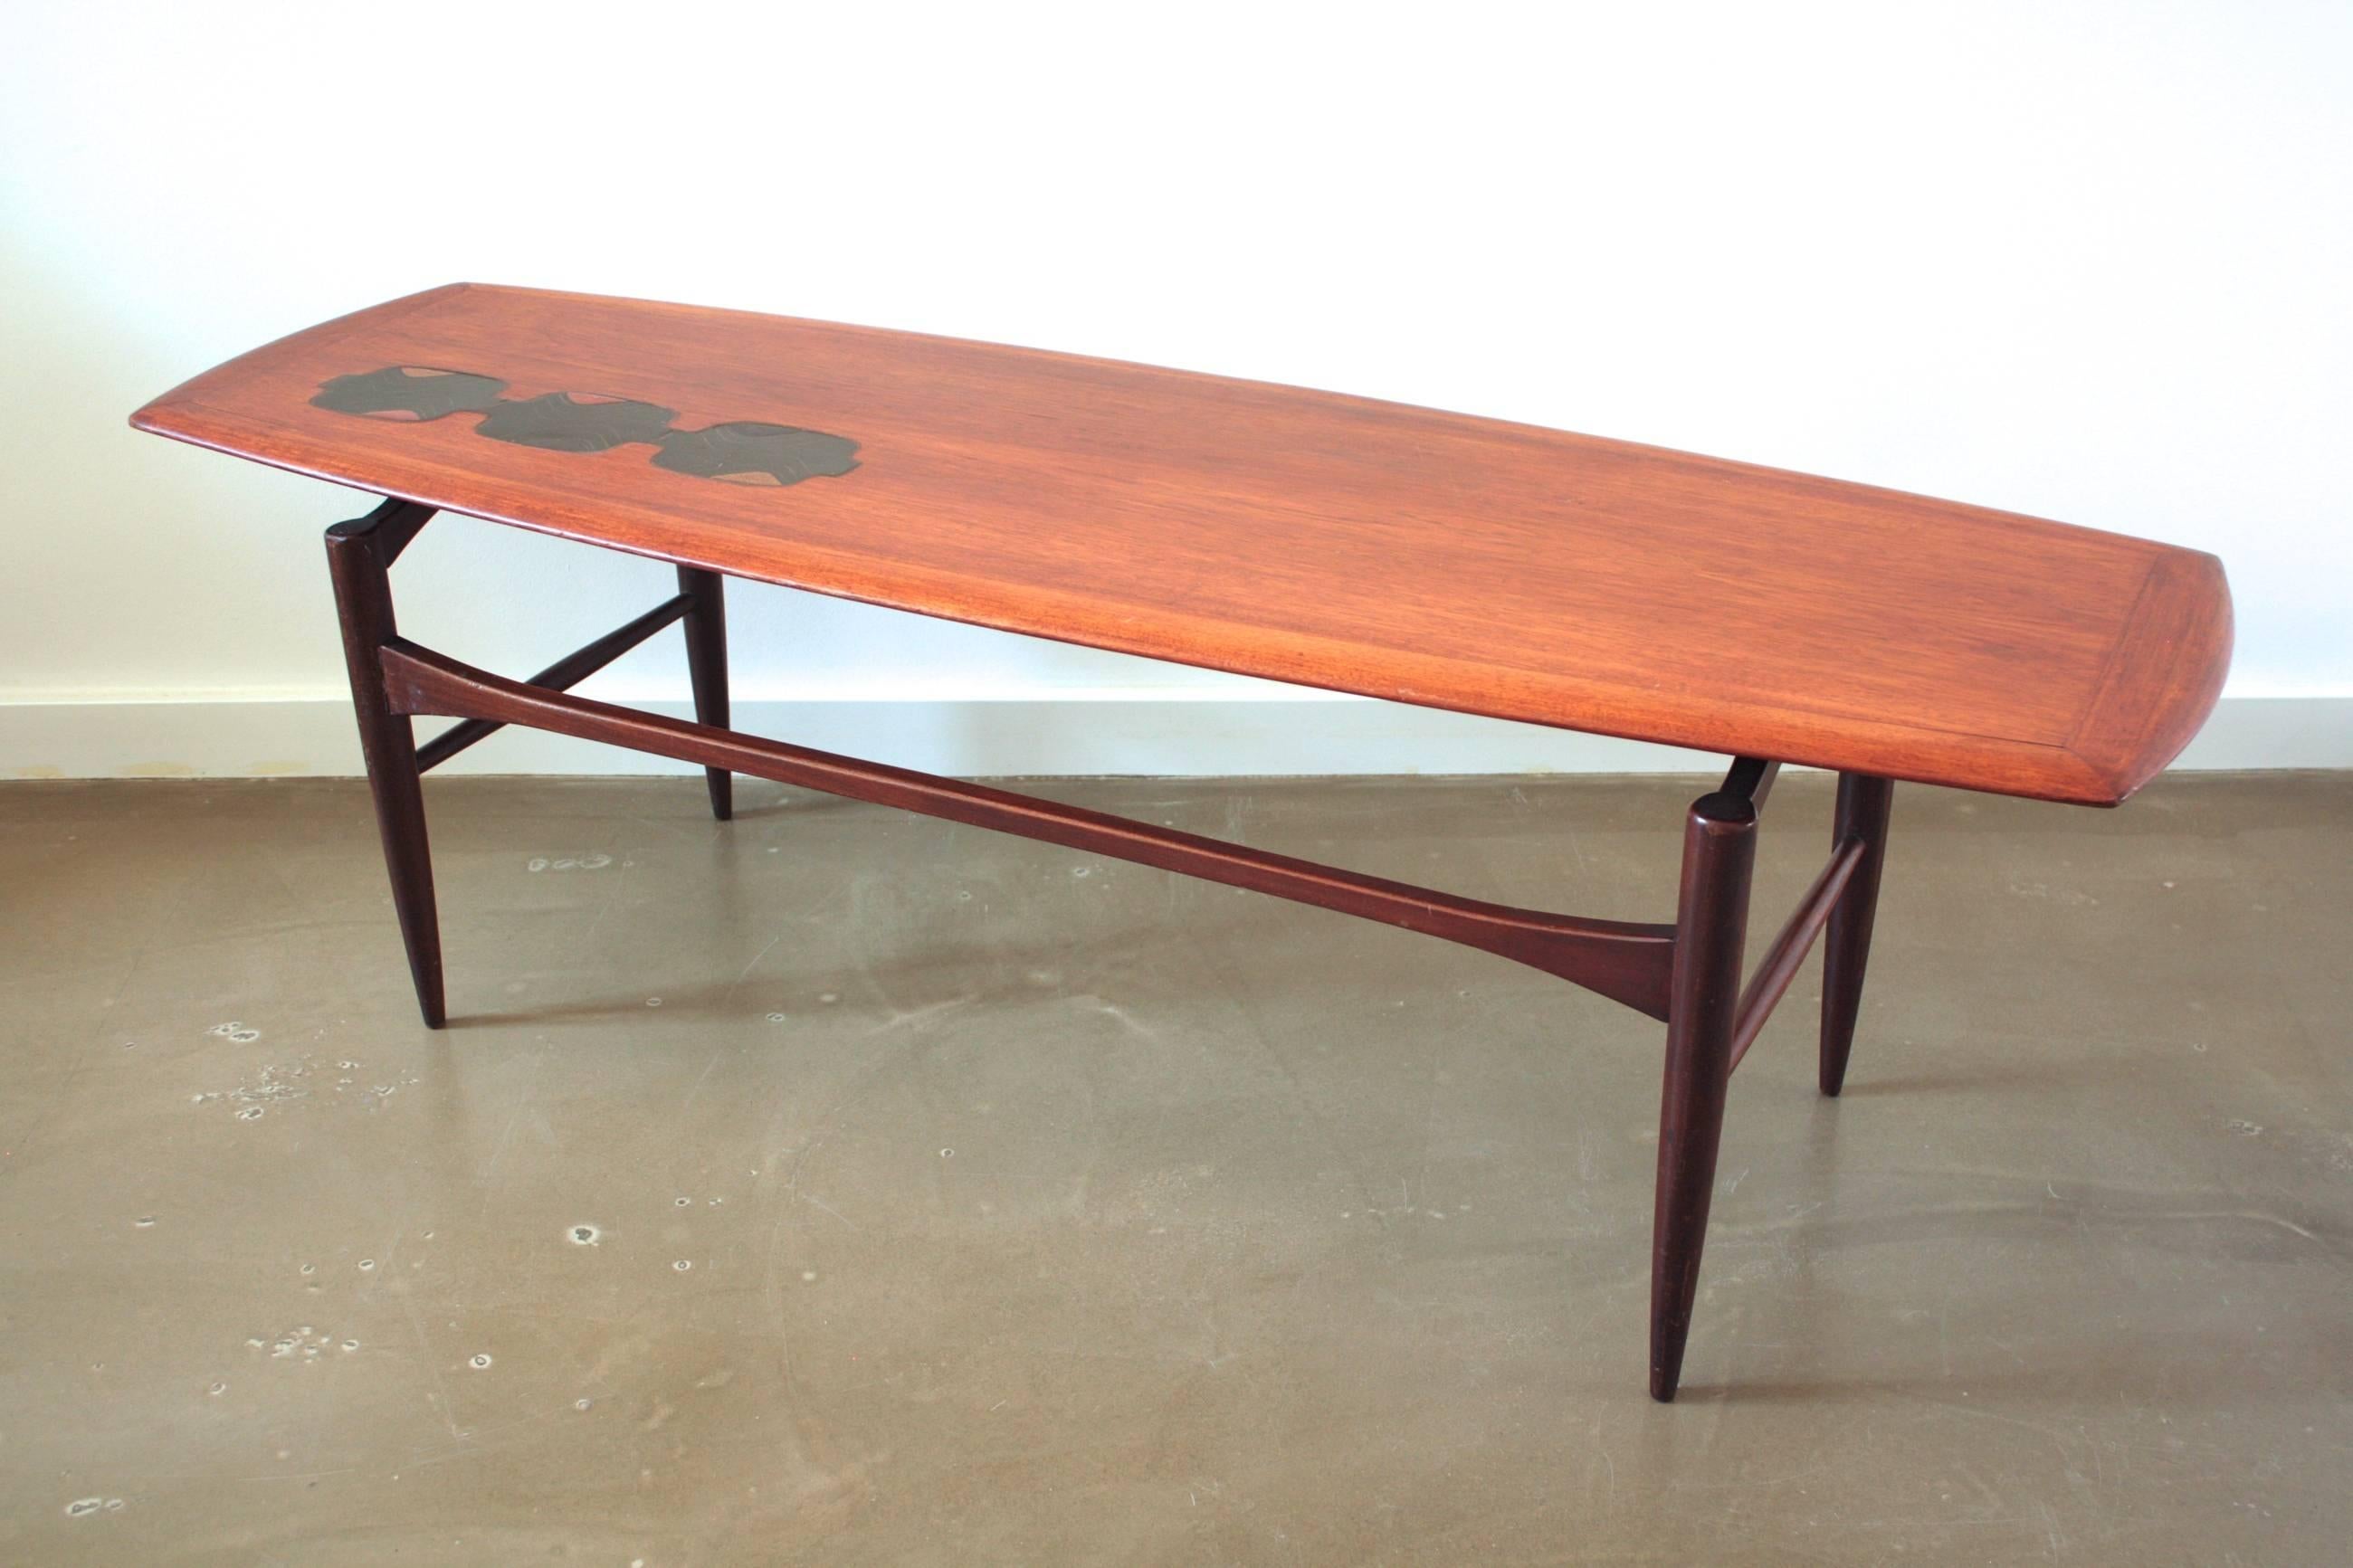 This coffee table is made from teakwood and was produced in the Netherlands in the 1960s. The top is rectangular and has rounded edges. It features three black inlay-like elements in the table top.